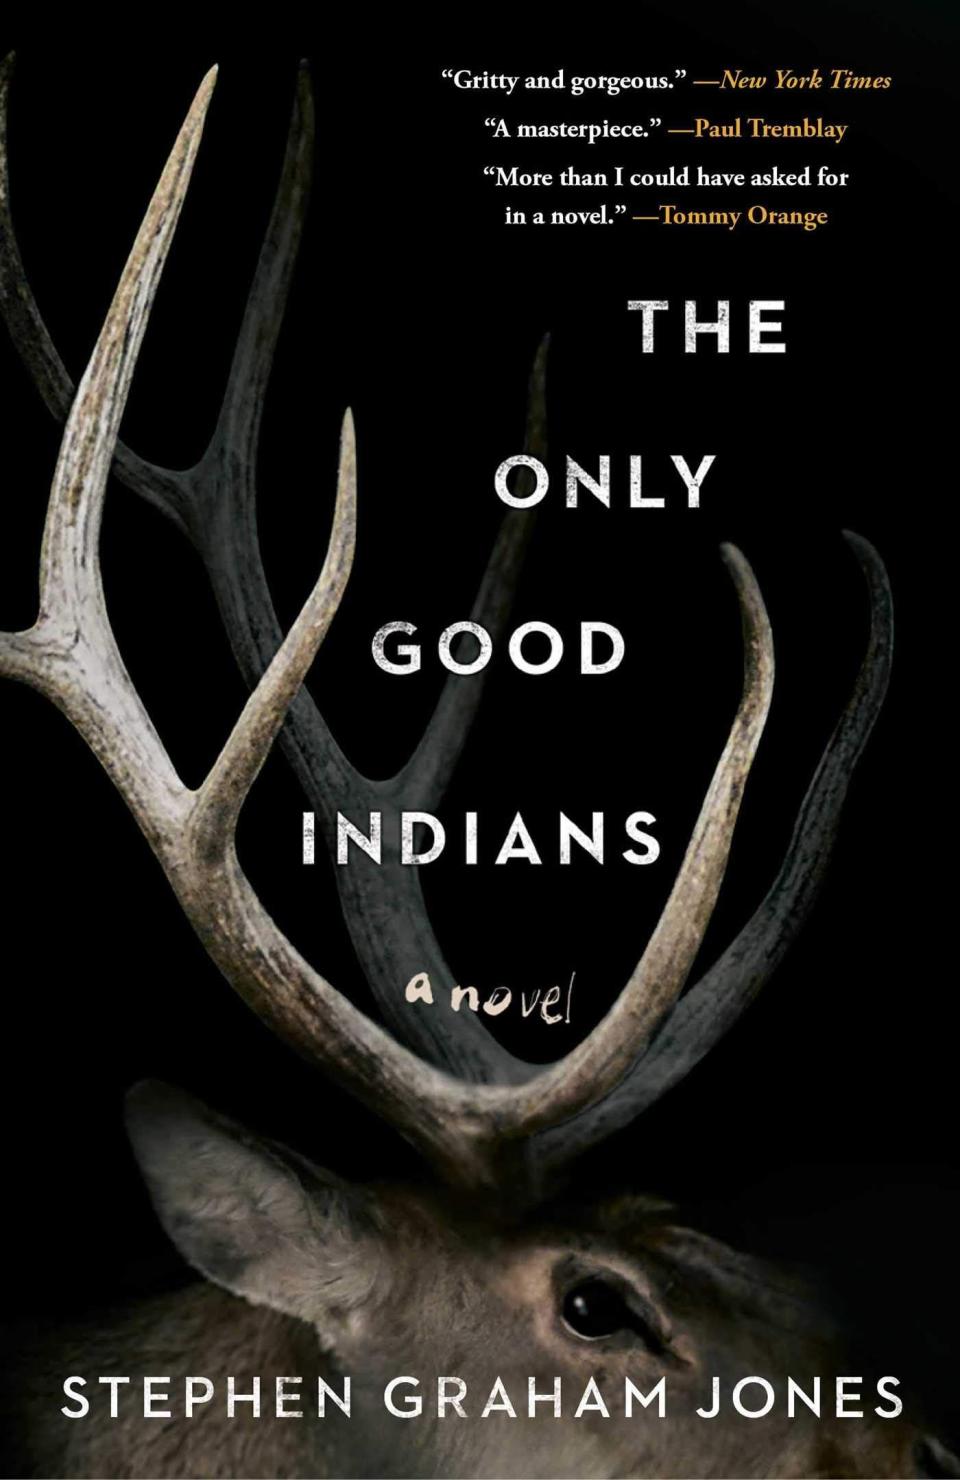 19) ‘The Only Good Indians’ by Stephen Graham Jones